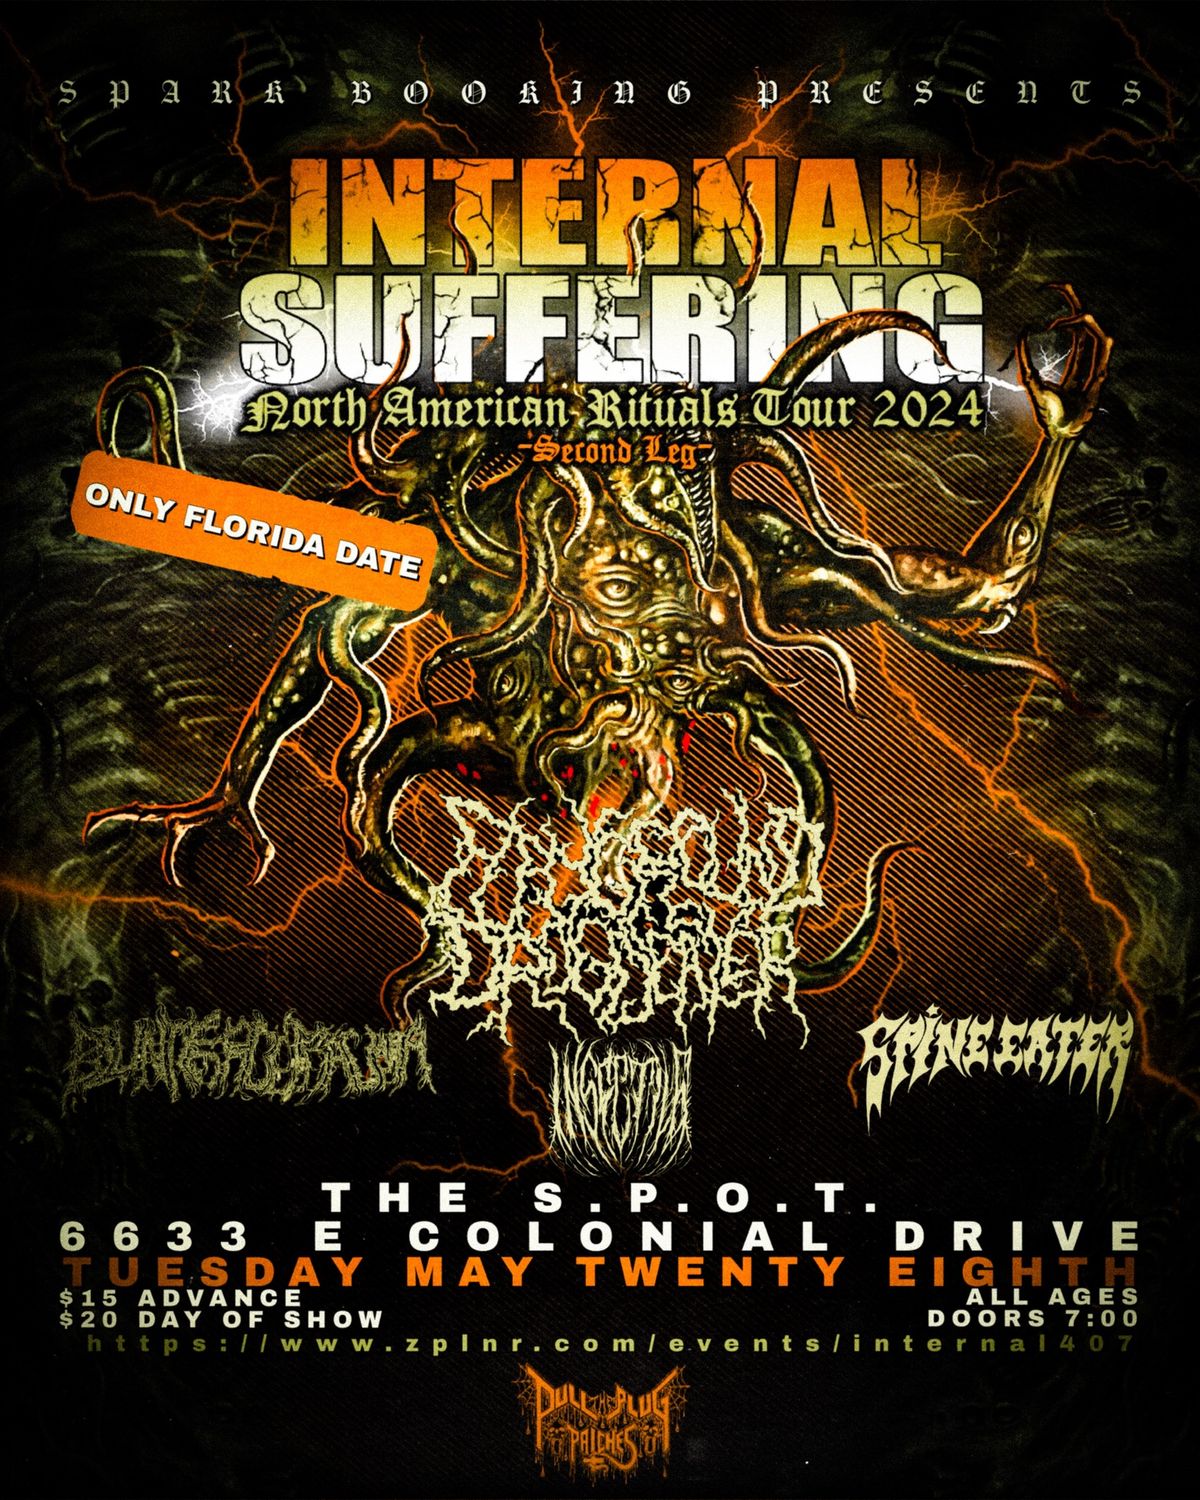 Internal Suffering, Playground Drugdealer, Blunt Force Trauma, Spine Eater, Insectile at The S.P.O.T